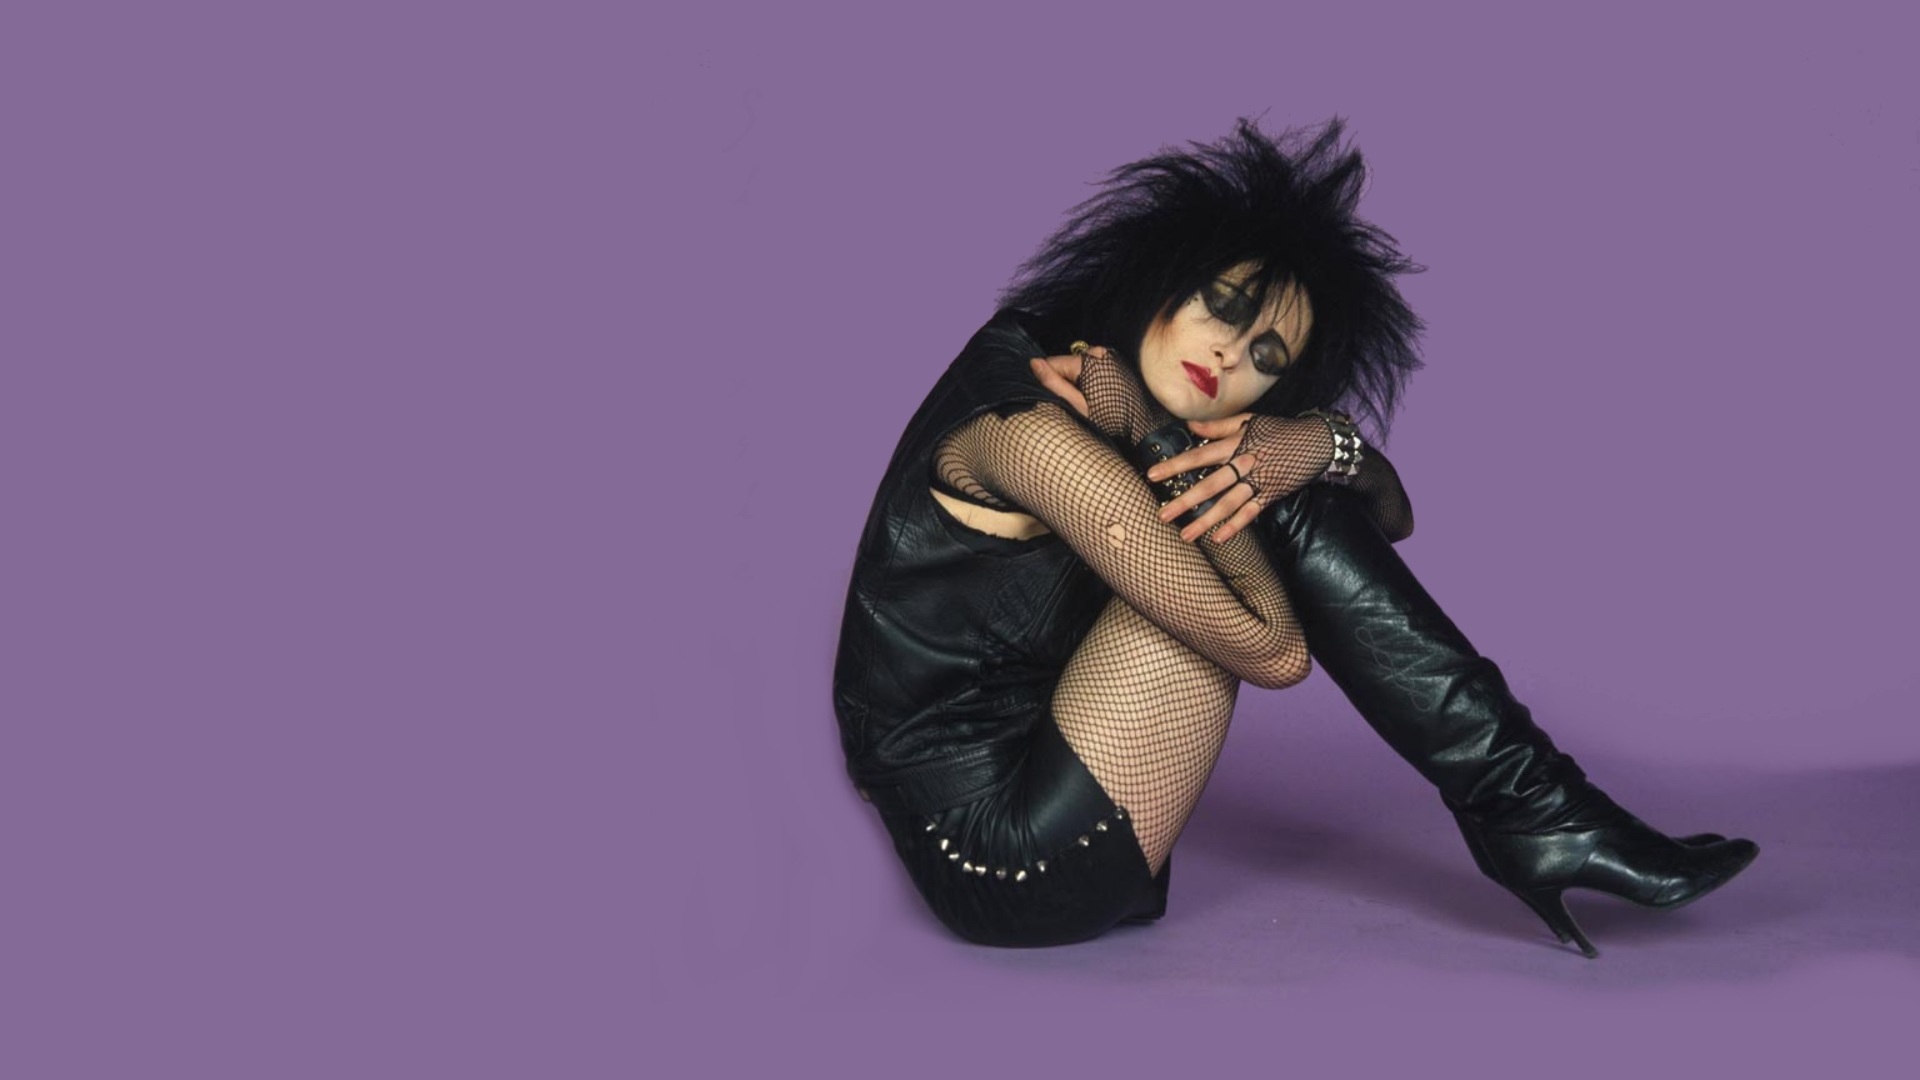 siouxsie and the banshees, music